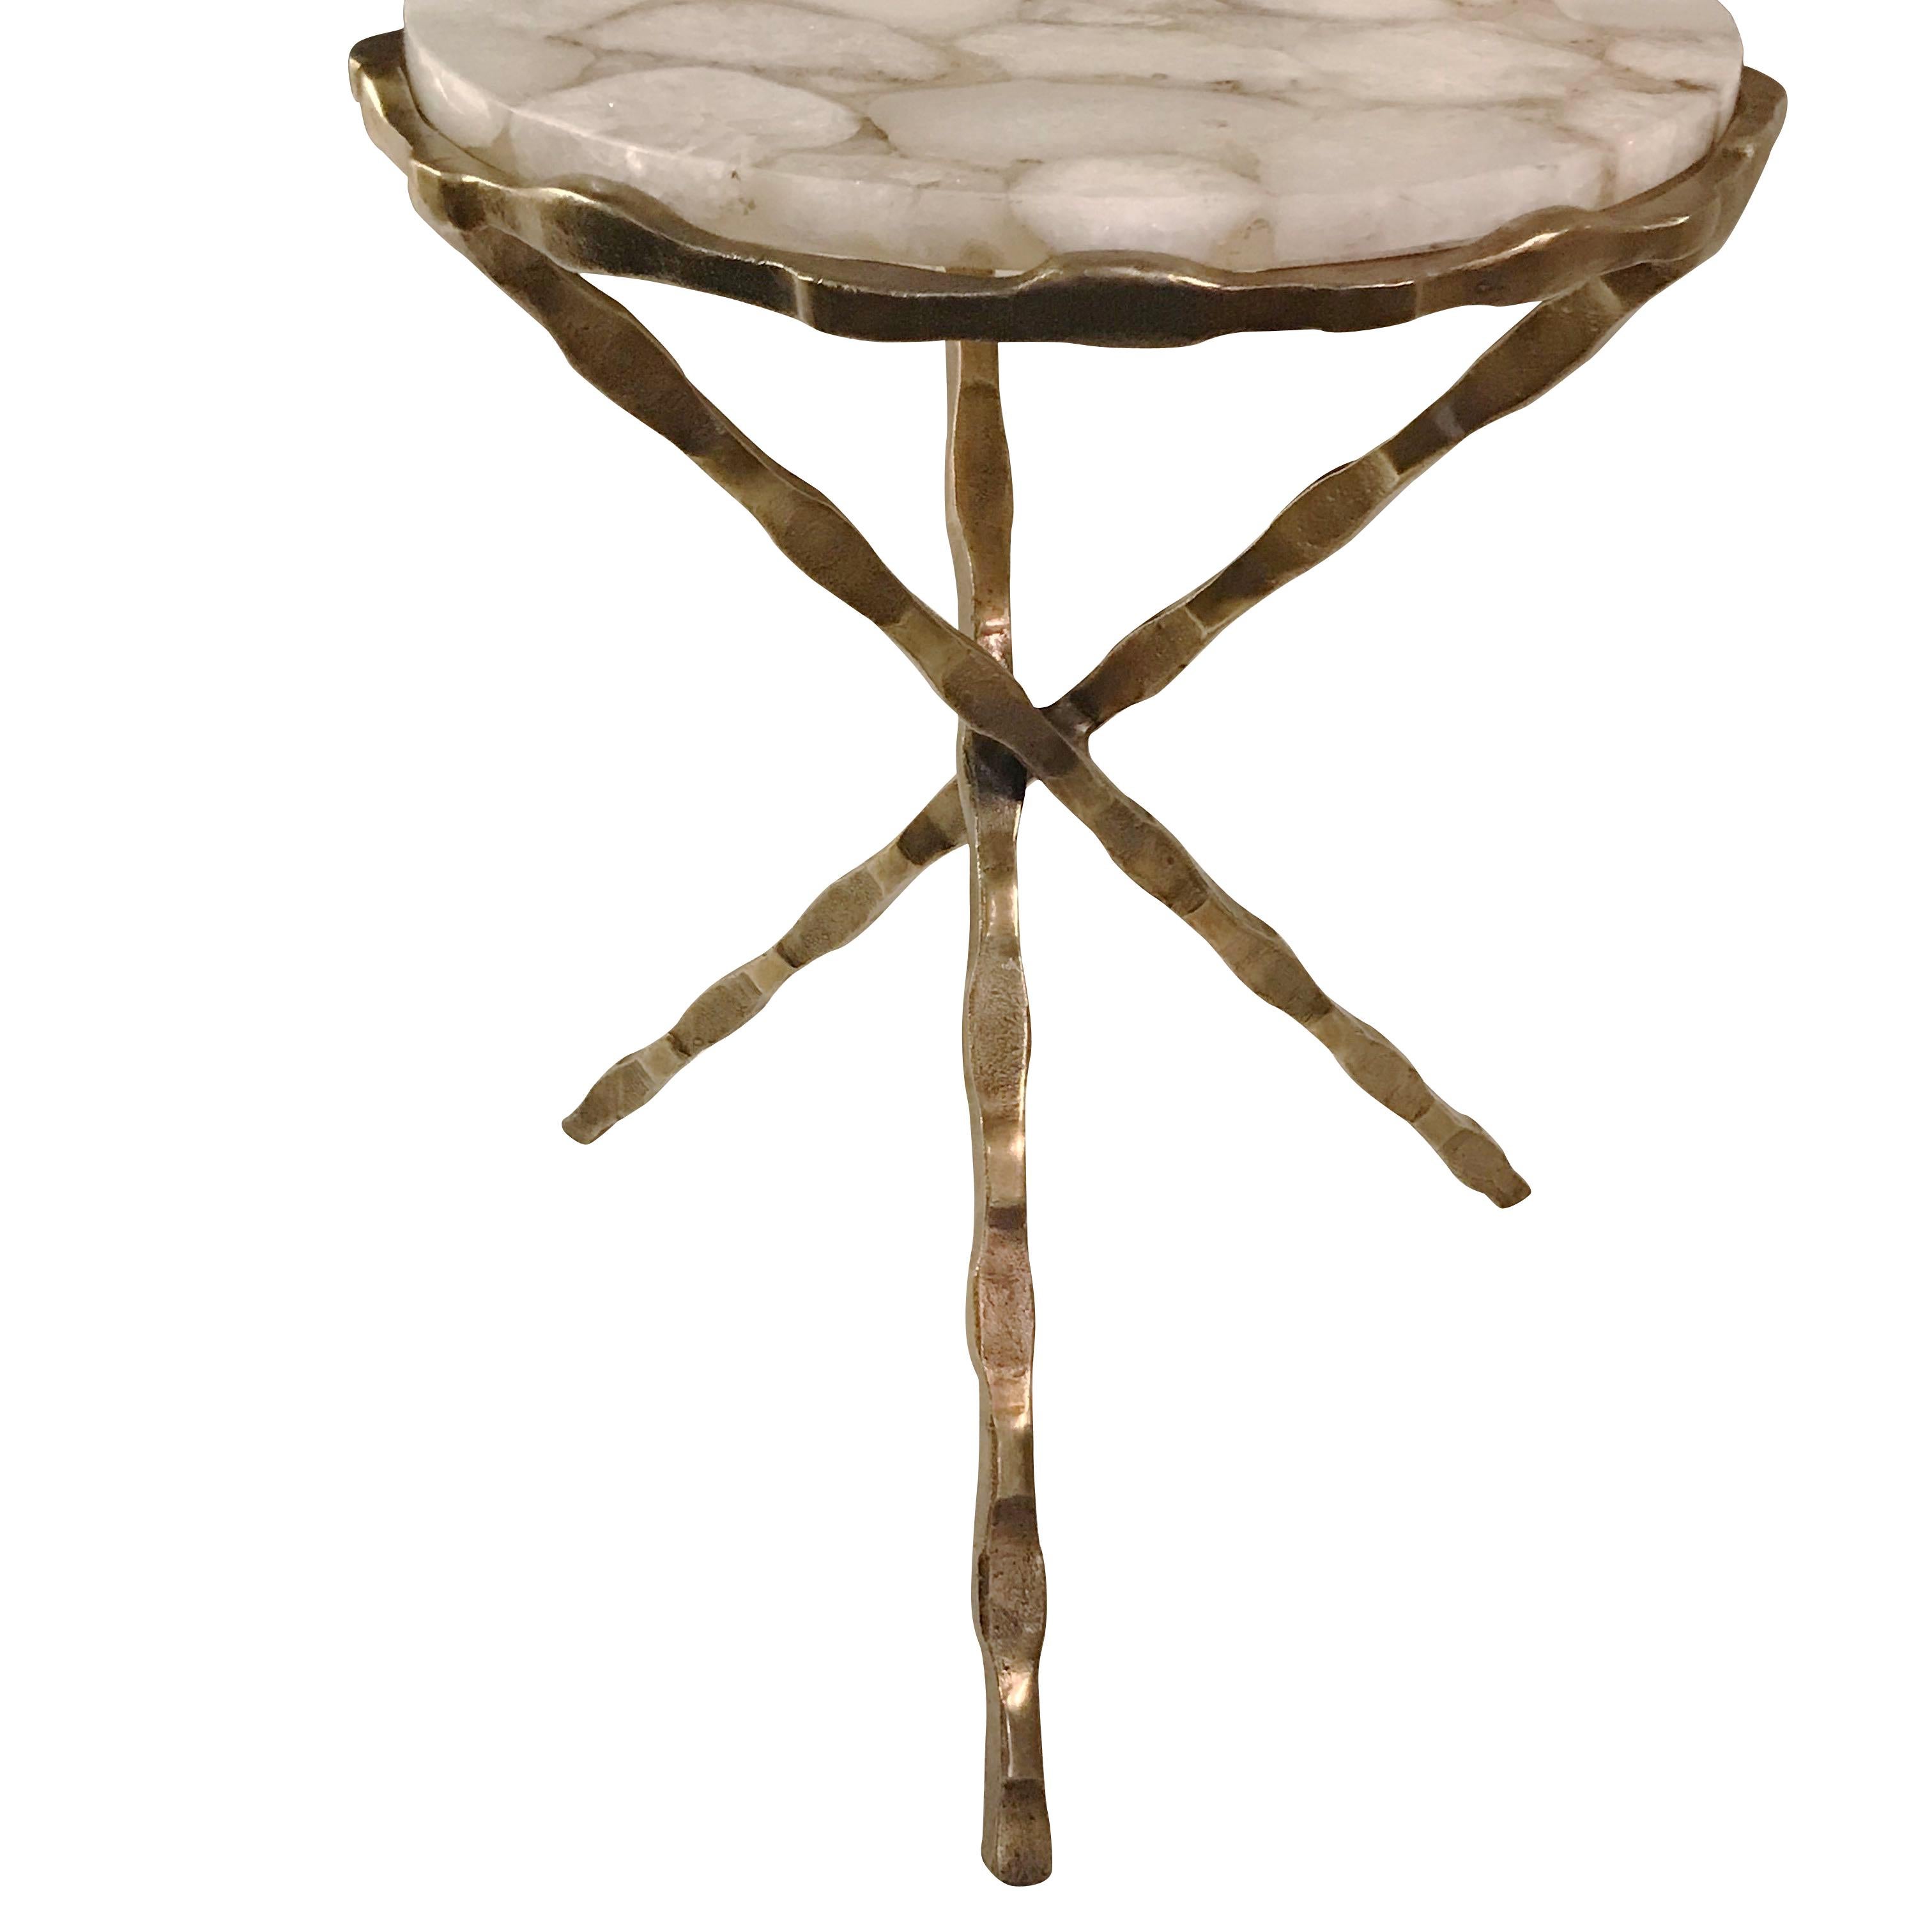 Belgian Sliced White Agate Top Cocktail Table, Belgium, Contemporary